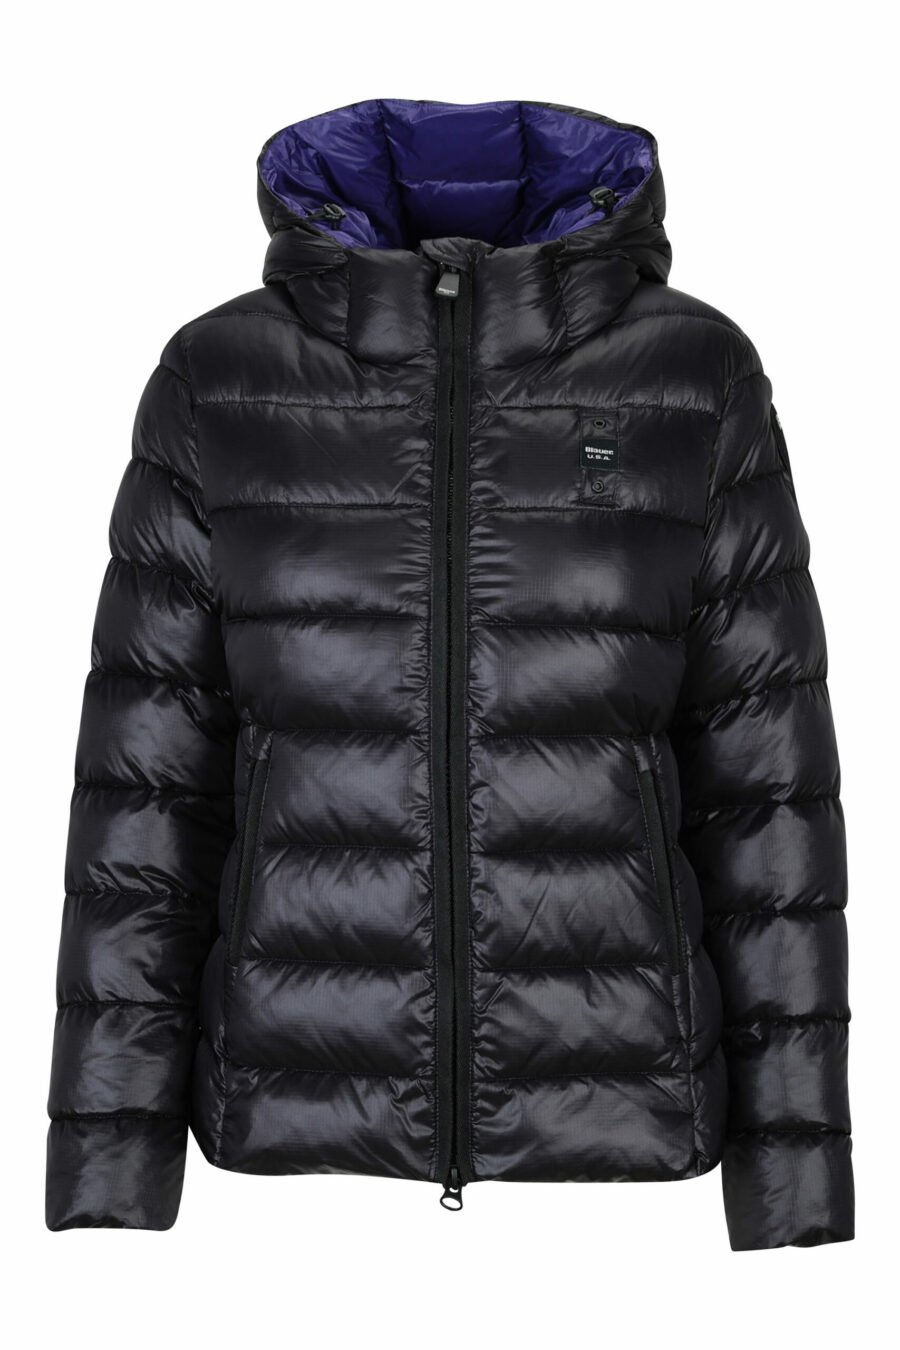 Black straight lined hooded jacket with purple inside with logo patch - 8058610683146 scaled